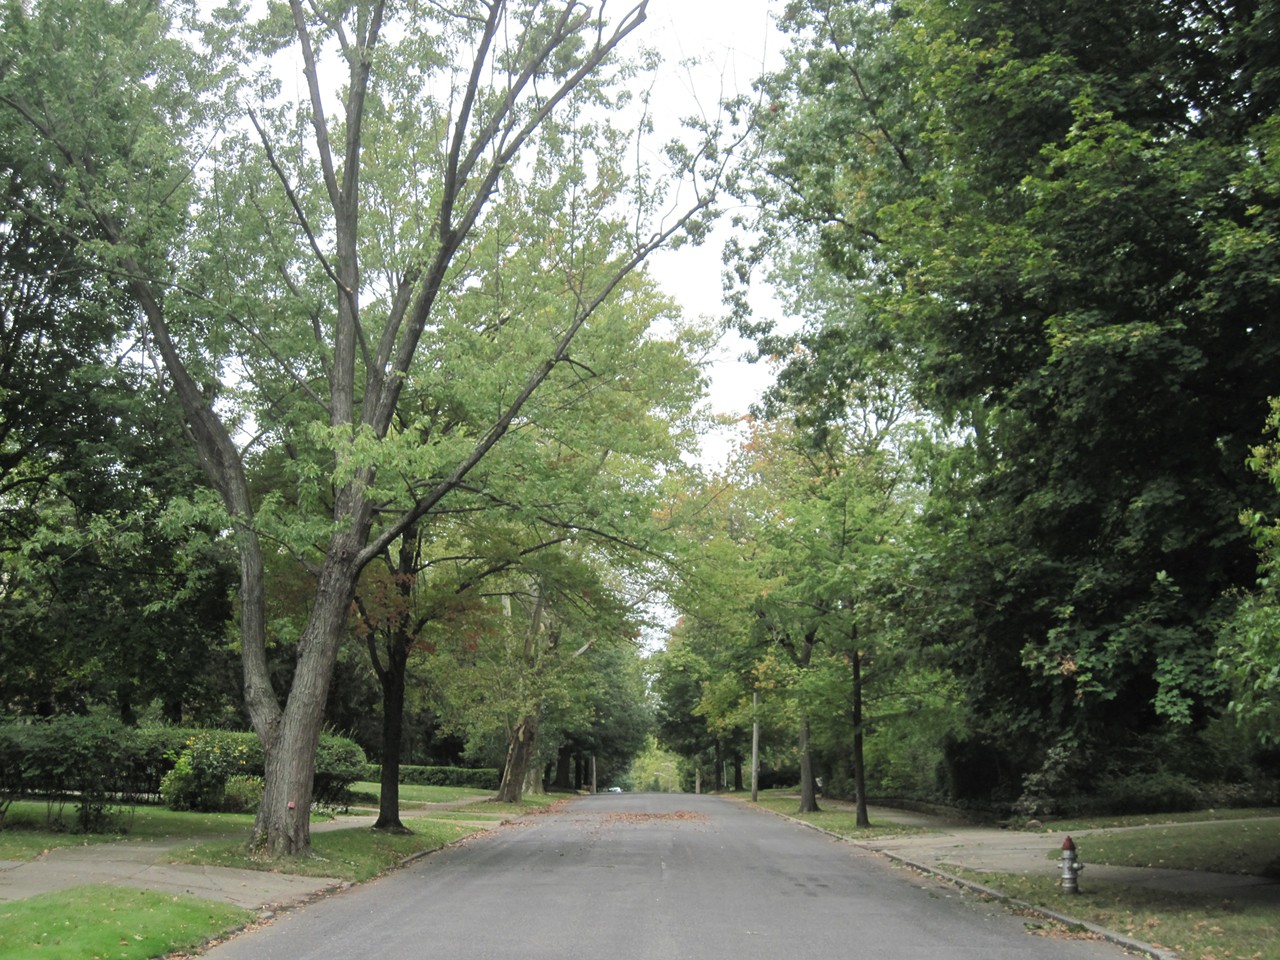 ...This one kinda came out of nowhere as we sought out the region's most scenic streets. It's intersects with Coventry and cuts a pleasant pathway through surrounding neighborhoods.